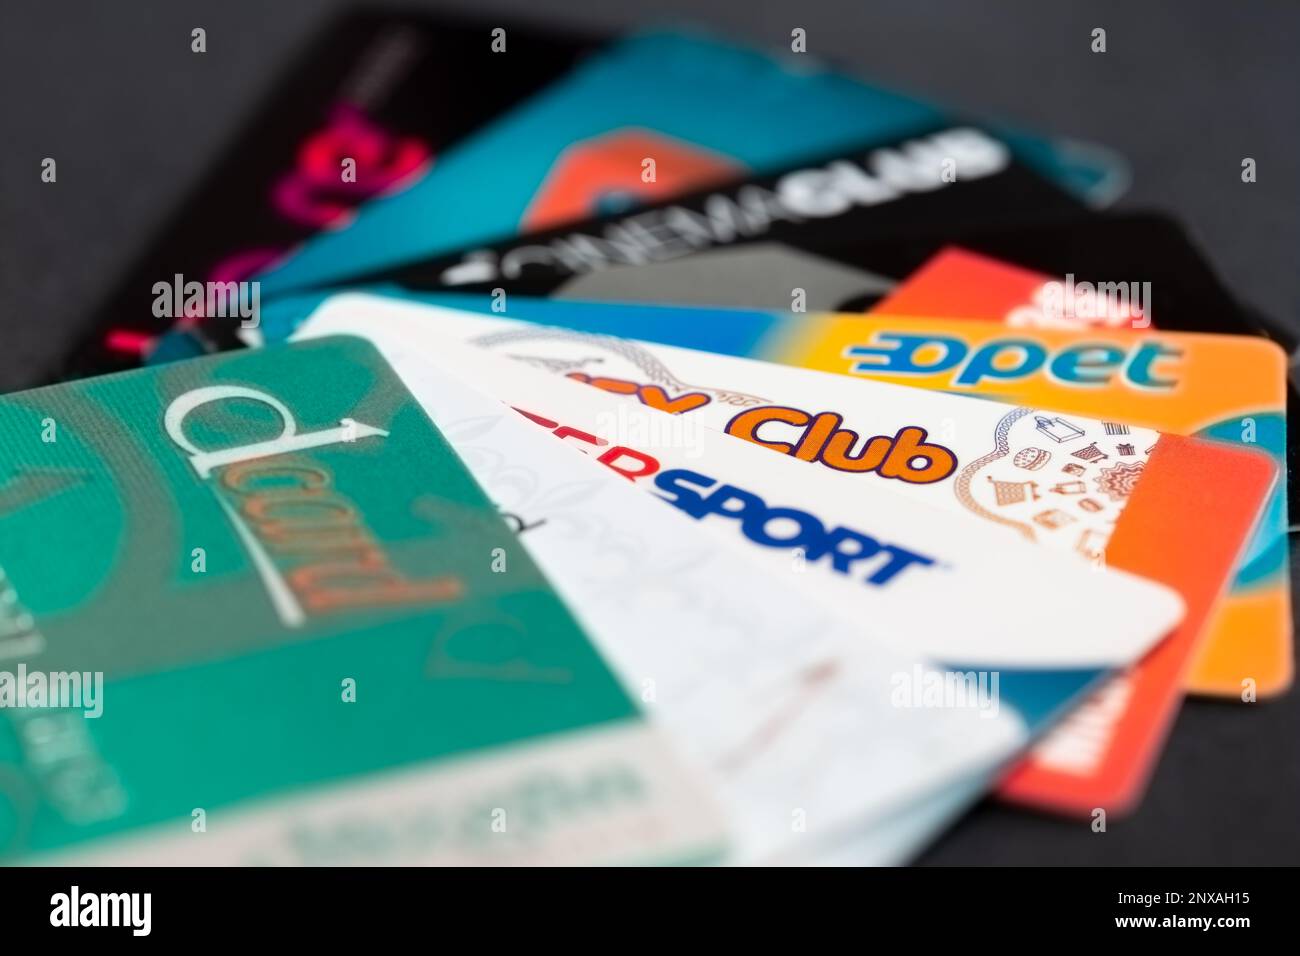 Selective focus of membership, gift and discount cards background lined up like poker cards. Stock Photo